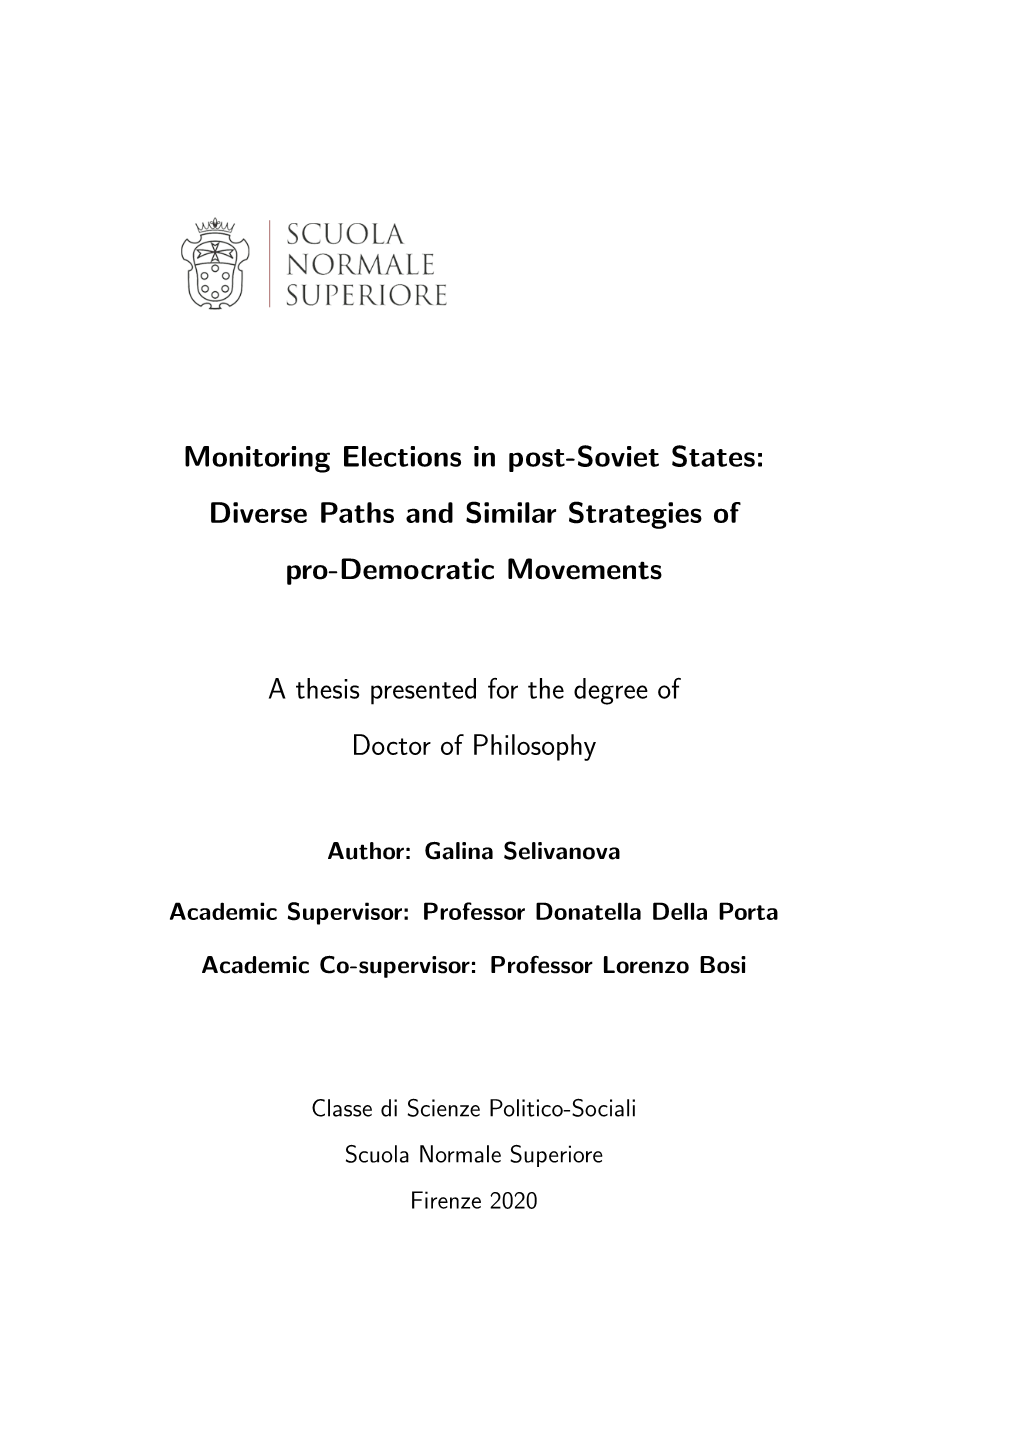 Monitoring Elections in Post-Soviet States: Diverse Paths and Similar Strategies of Pro-Democratic Movements a Thesis Presented